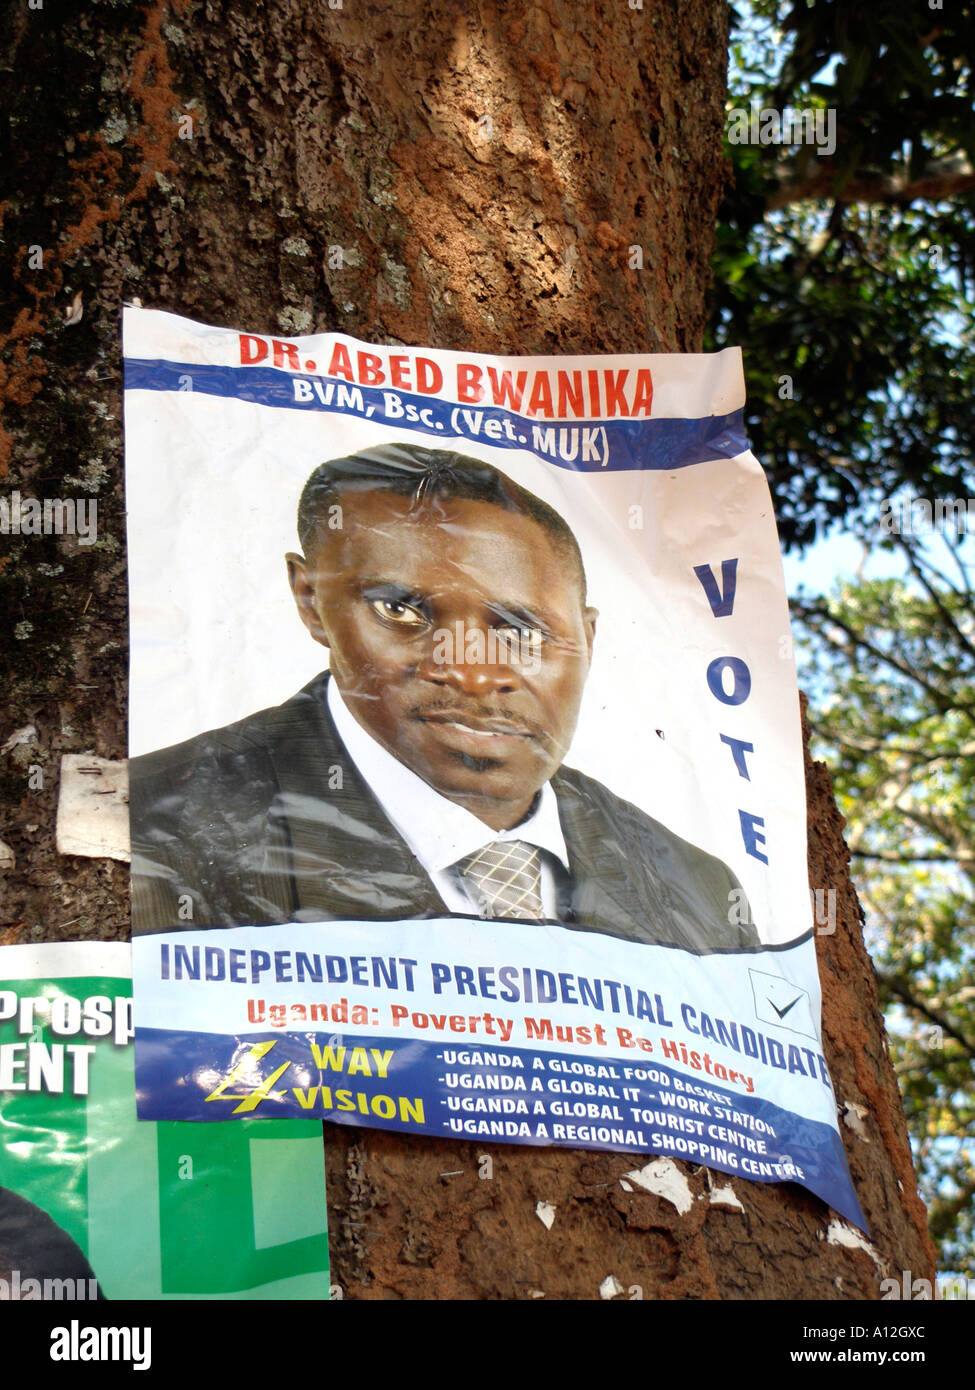 Presidential election campaign poster for Dr. Abed Bwanika, Kampala, Uganda Stock Photo